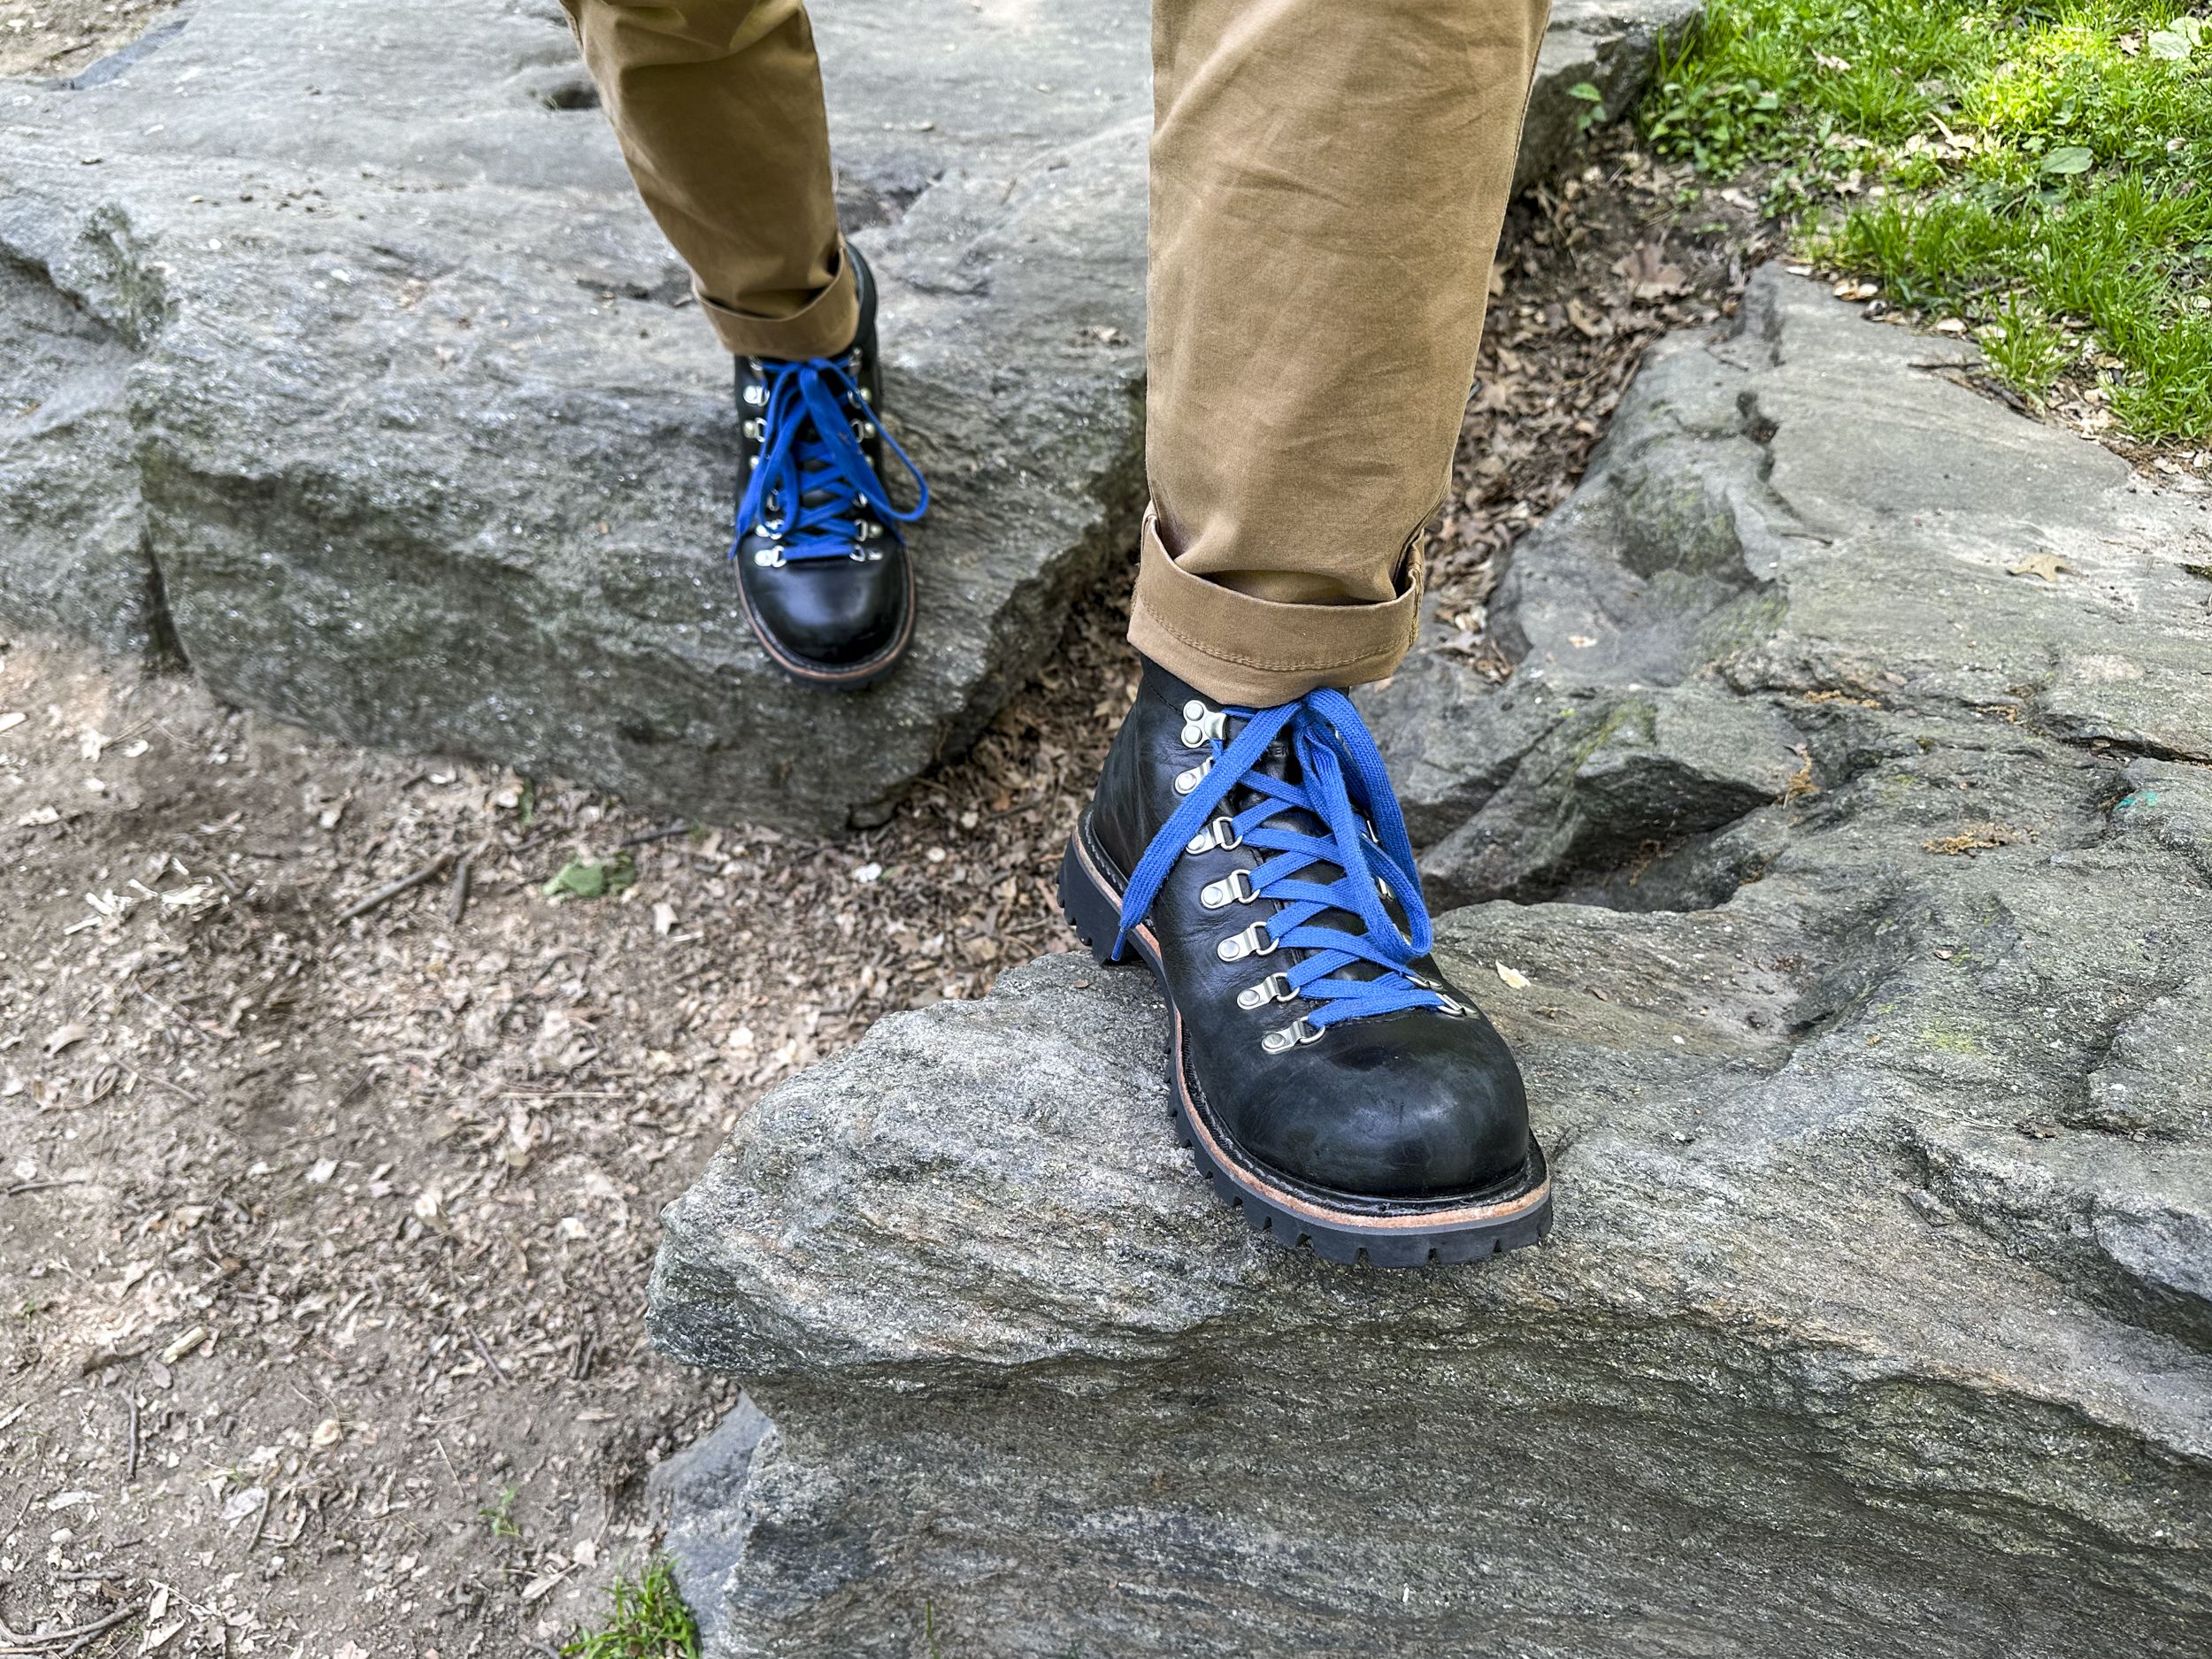 Gifting Durable and Comfortable Hiking Boots